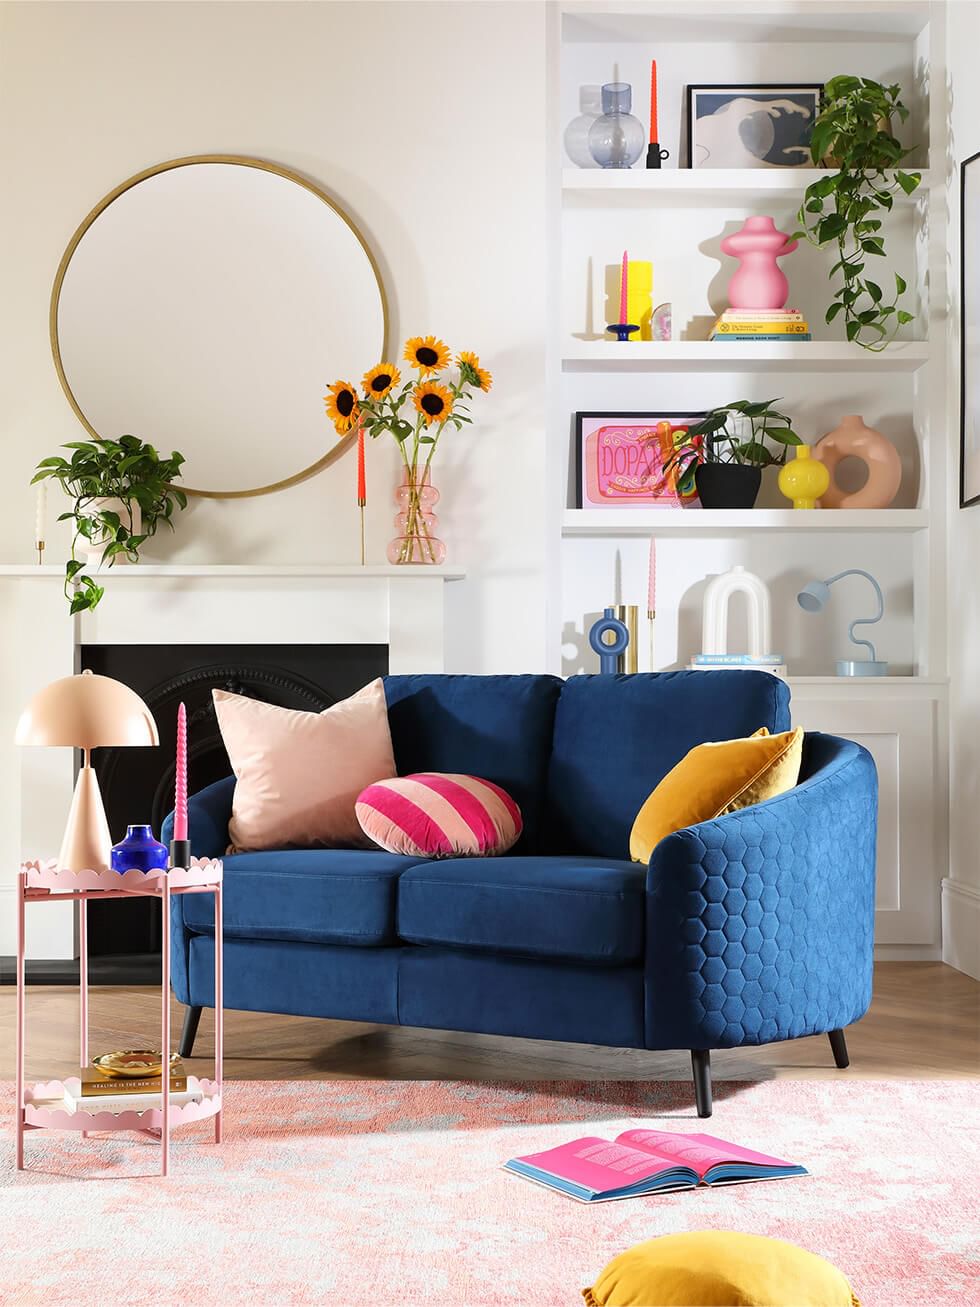 Dopamine decor living room with blue velvet sofa and pink accents